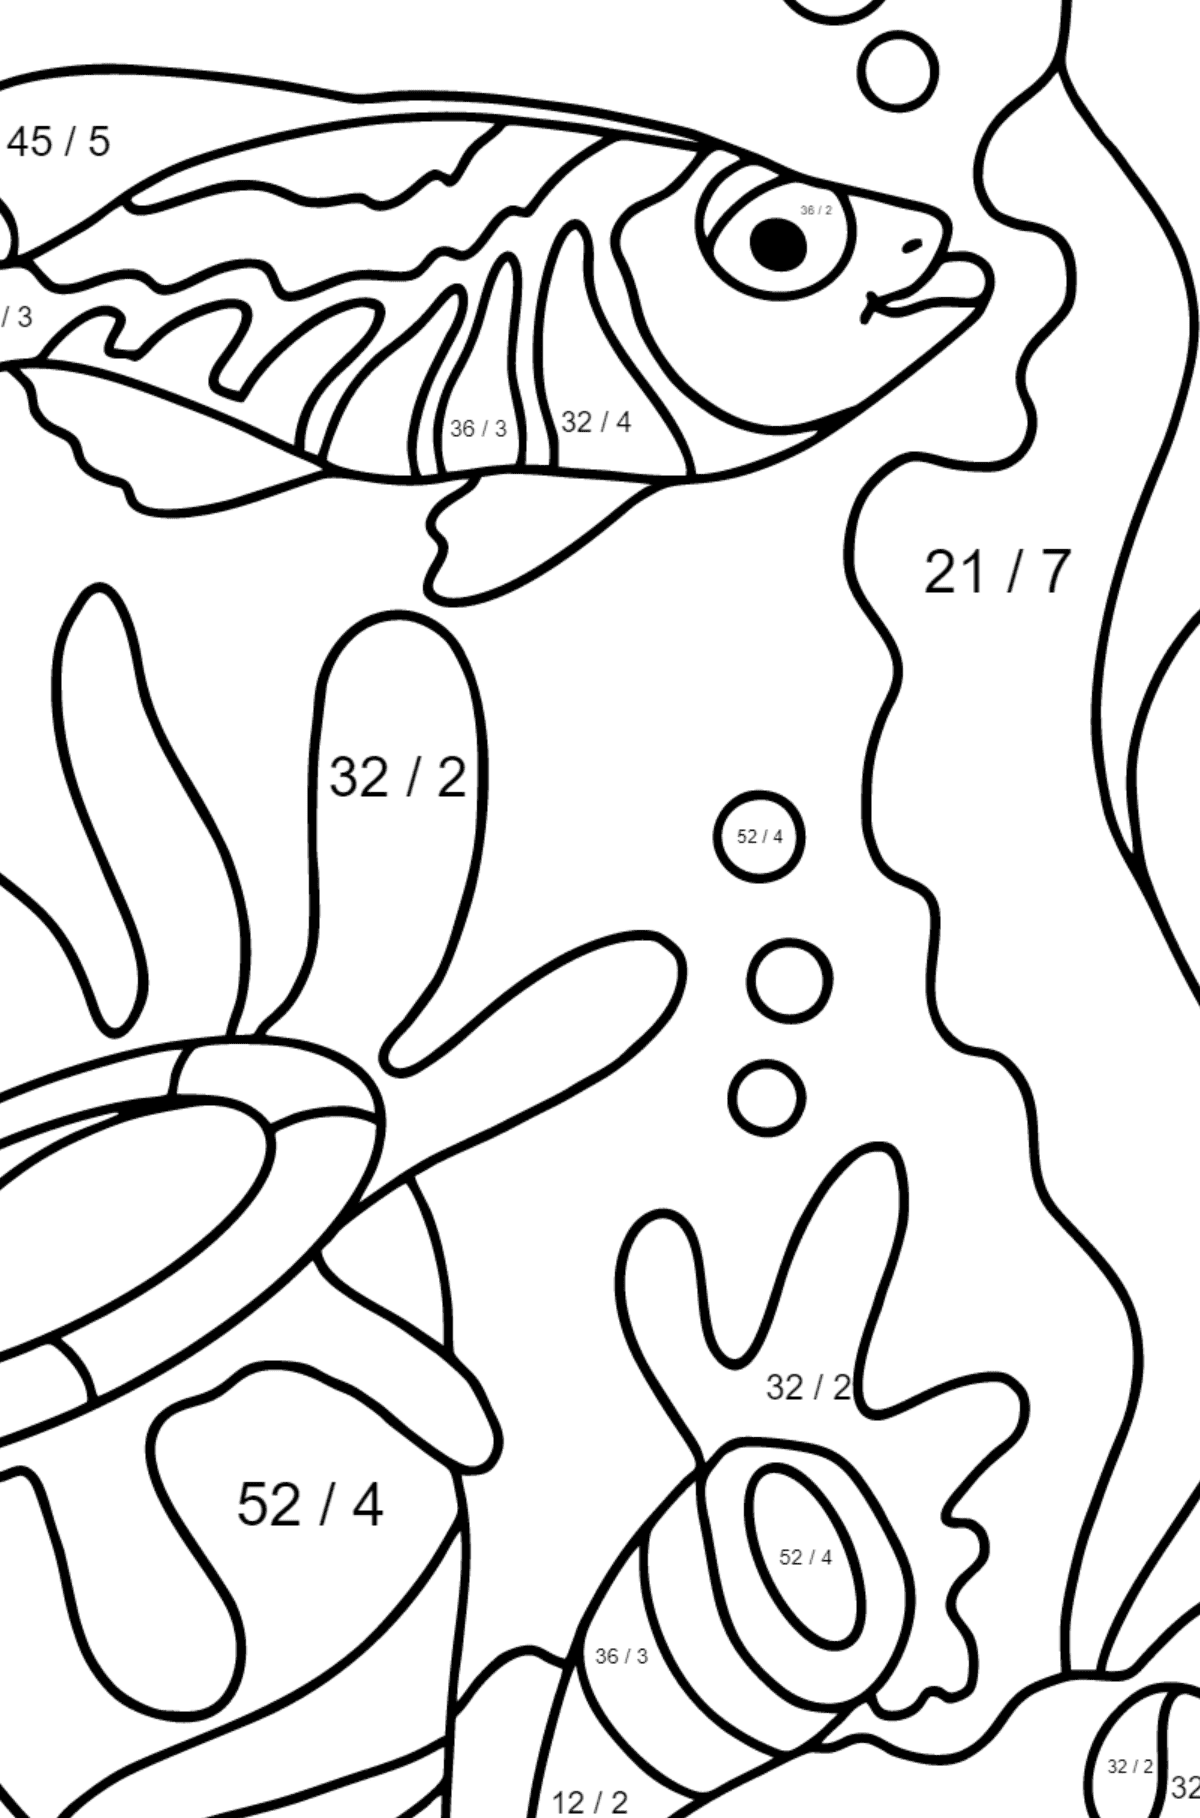 Coloring Page - A Fish is Admiring the Corals - Math Coloring - Division for Children